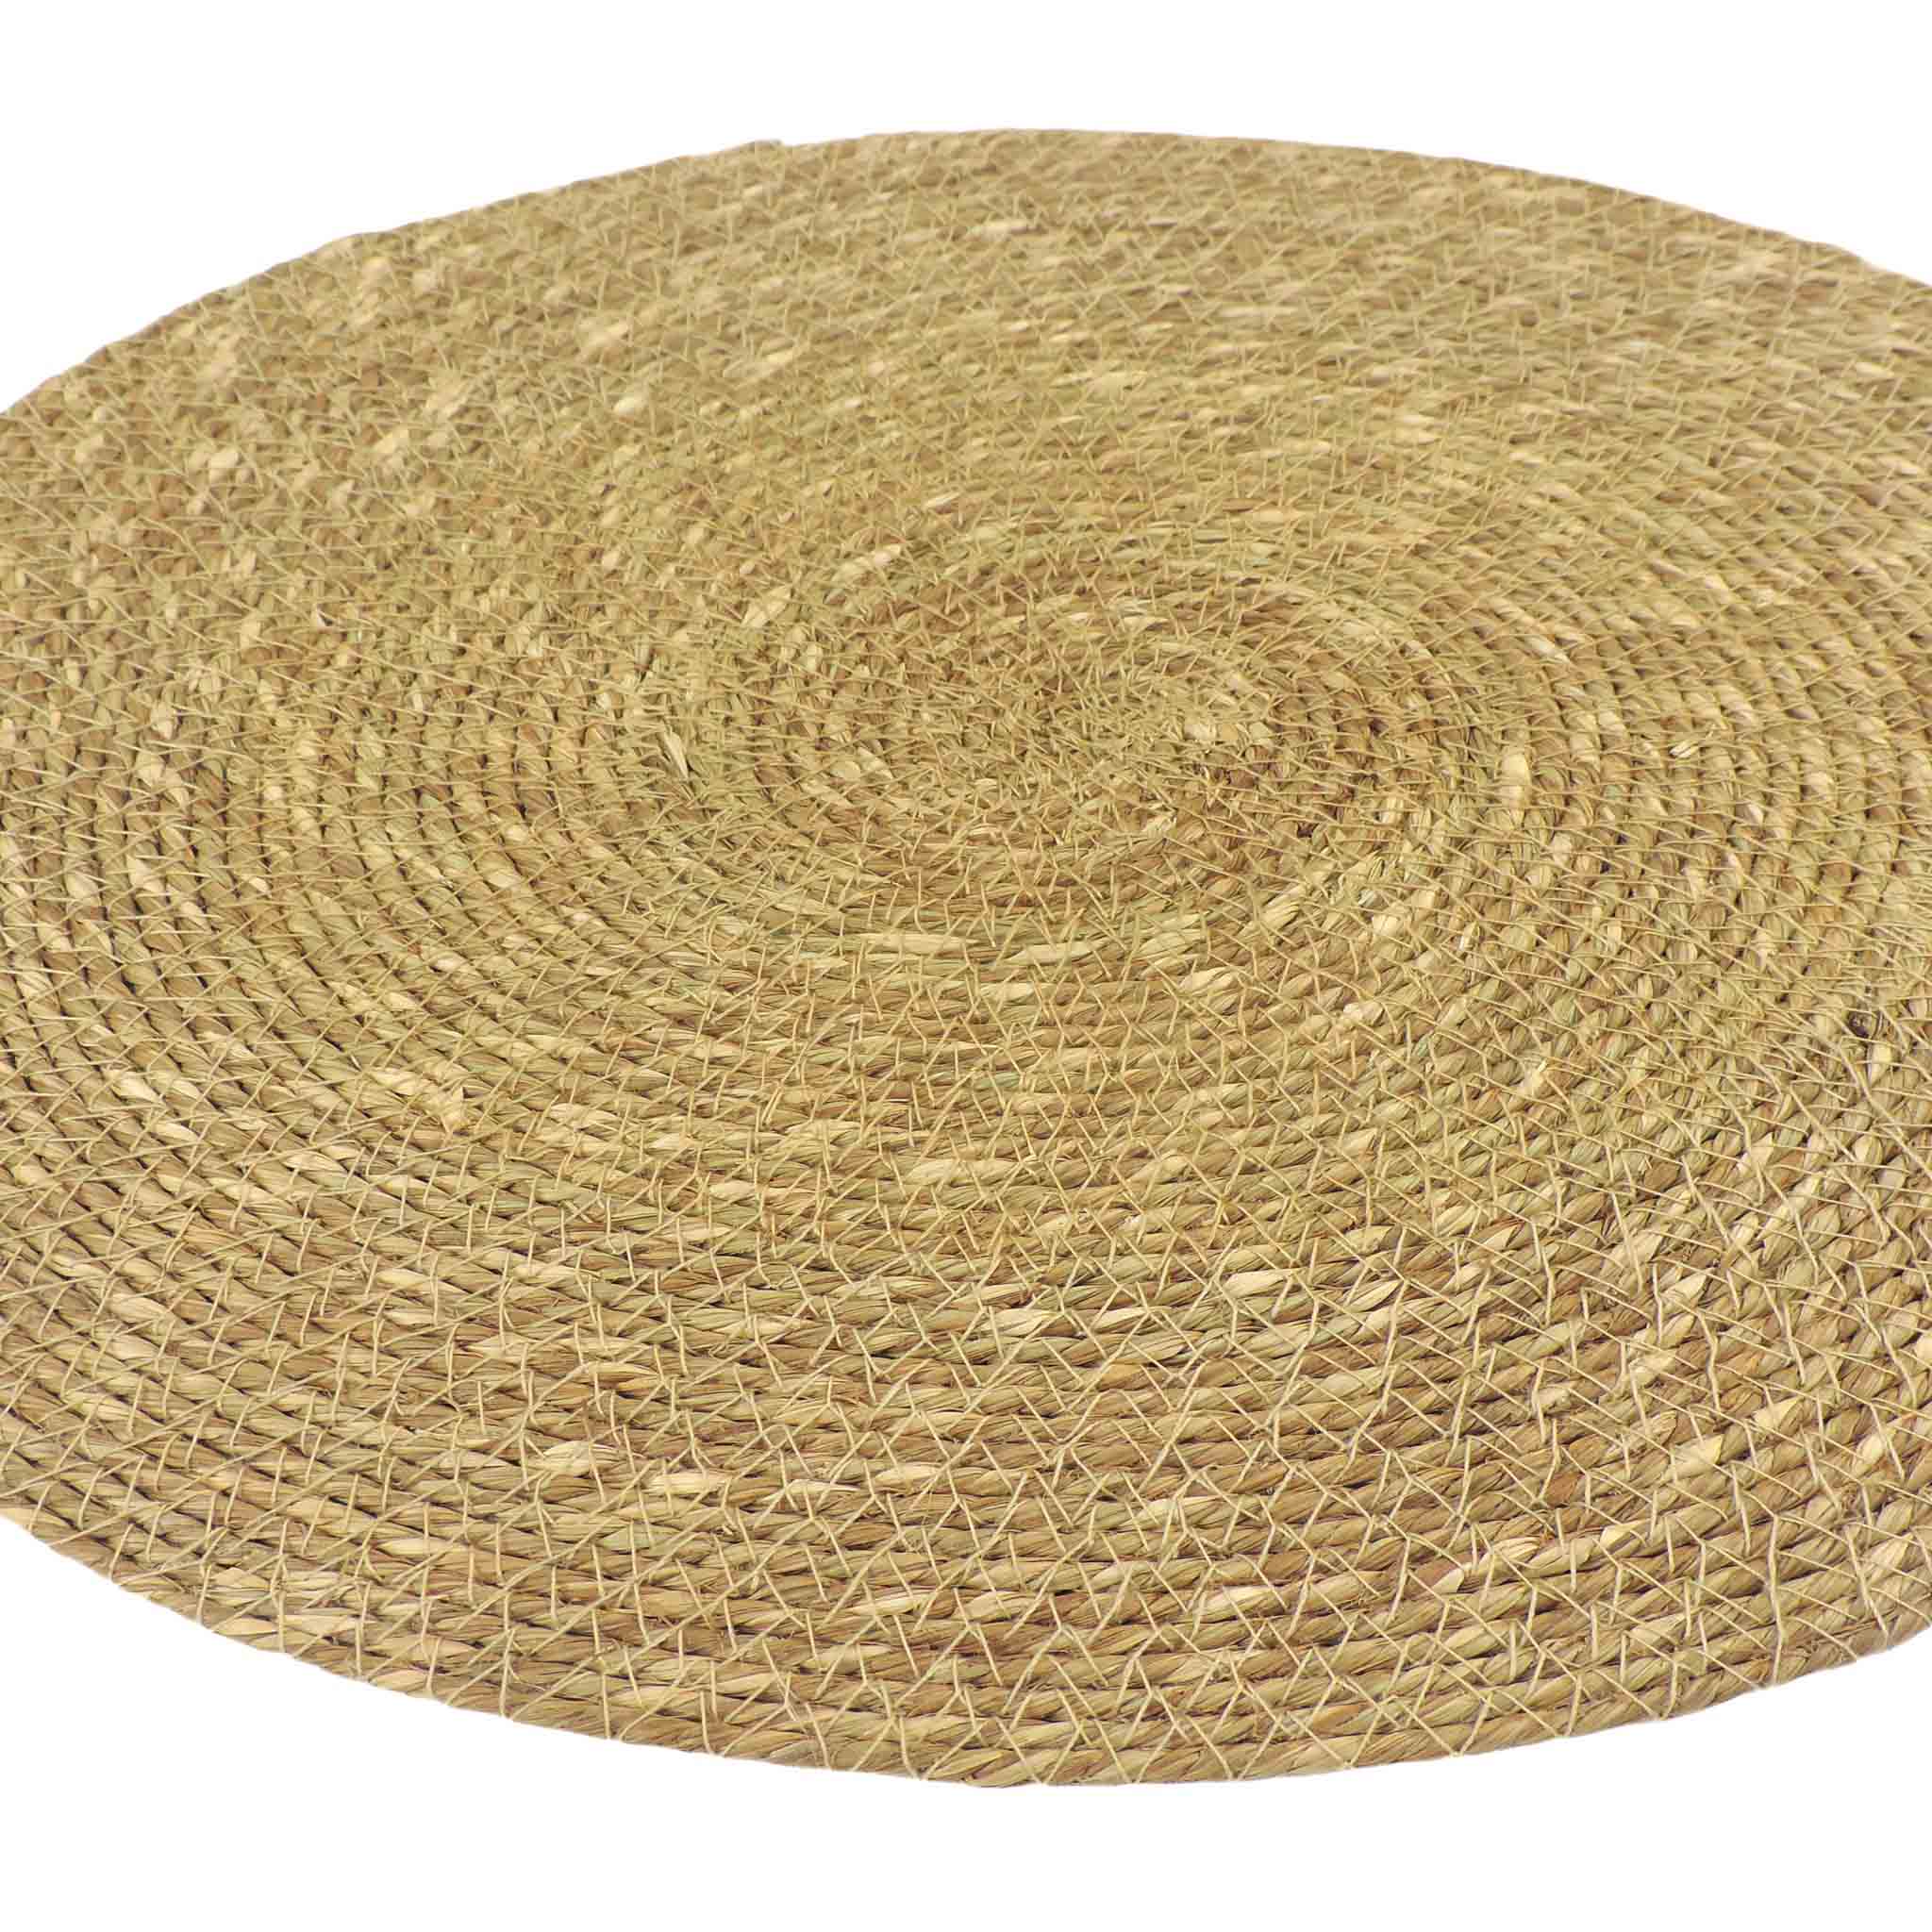 Braided Jute Round Placemat in Natural, Set of 2/4